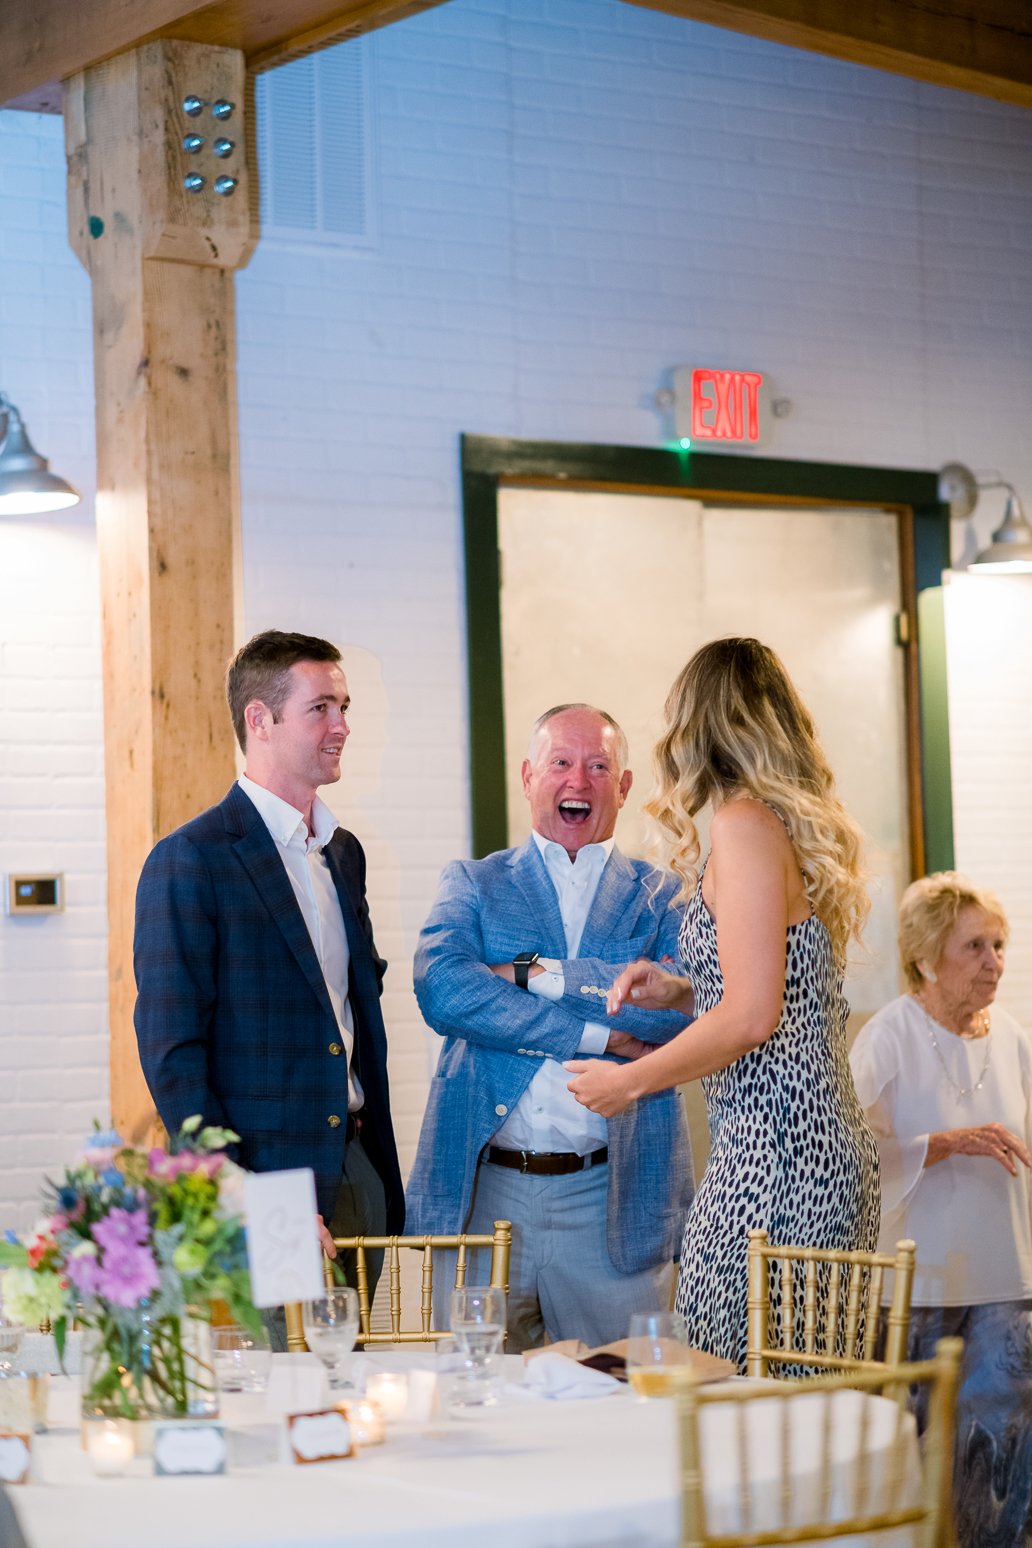 WoolenMill_TheSIlkMill_FredericksburgWeddingVenue_DowntownFredericksburg_VirginiaWeddingVenue_Event_BridalShow2023_youseephotography_pic82.jpg